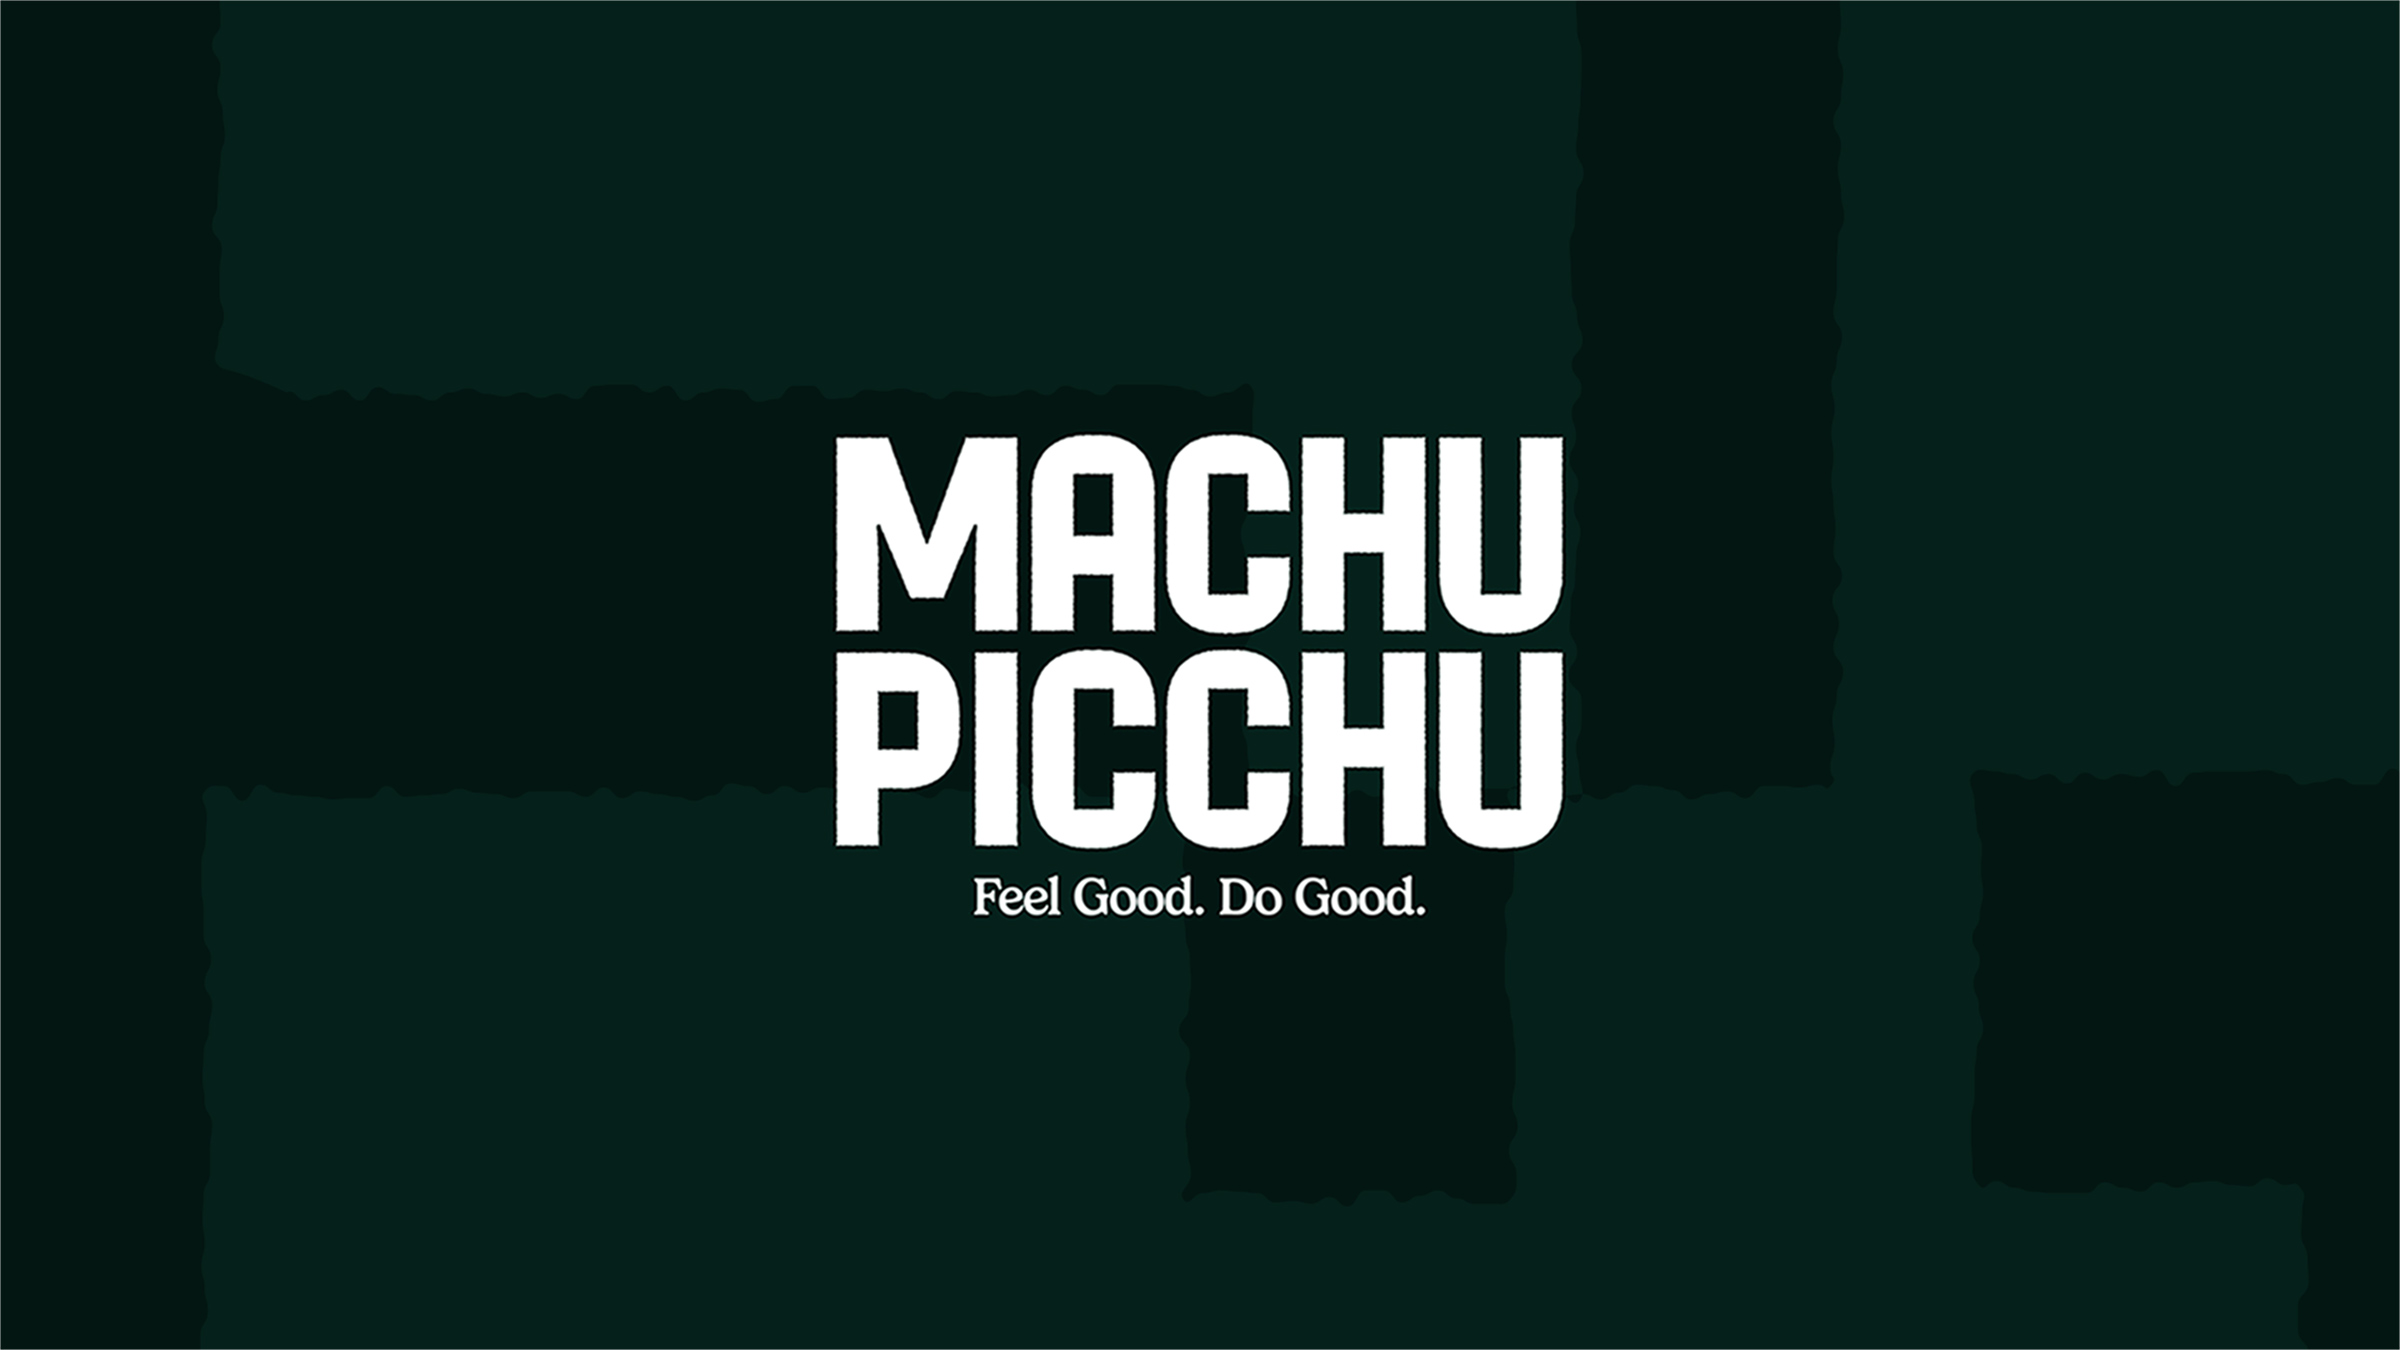 Firma Goes Beyond Design for Mission-Centered Beverage Brand Machu Picchu Energy